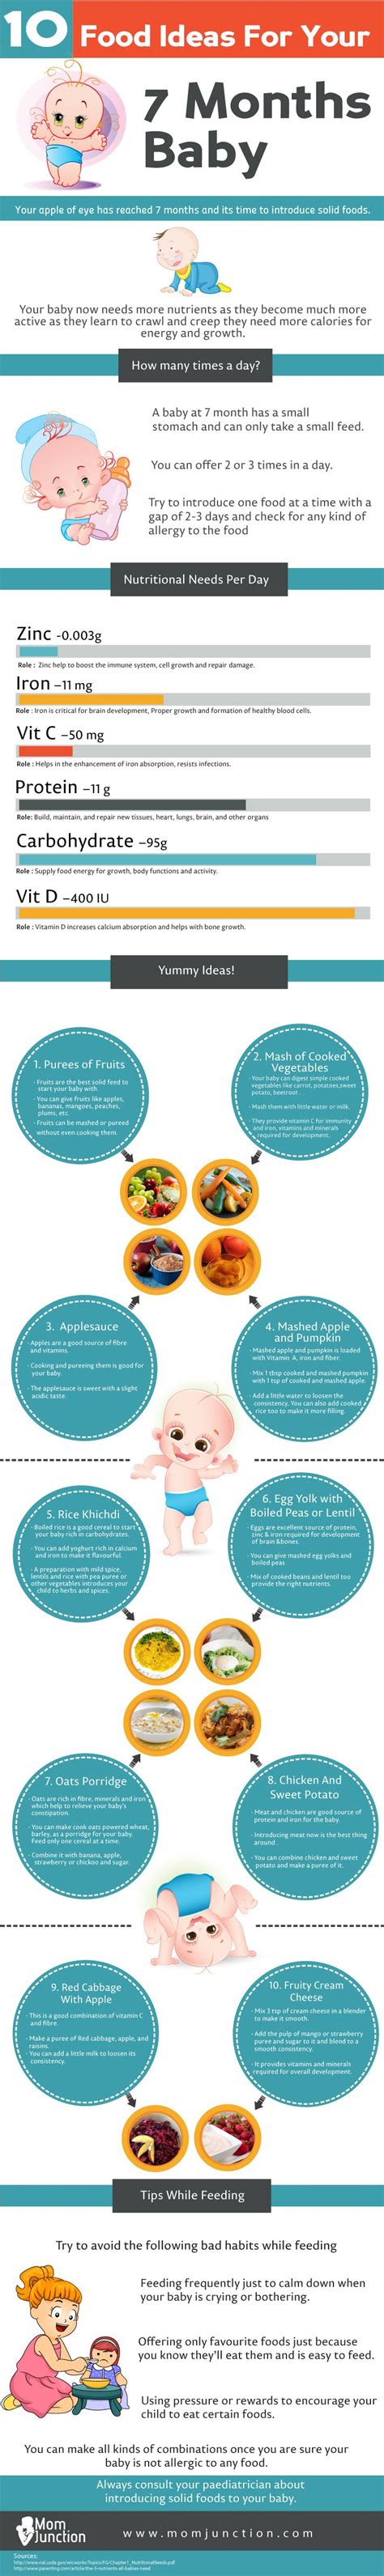 These easy, nutritionally balanced recipes are designed to introduce your baby to a range of new foods. Top 10 Food Ideas For Your 7 Months Baby [Infographic ...